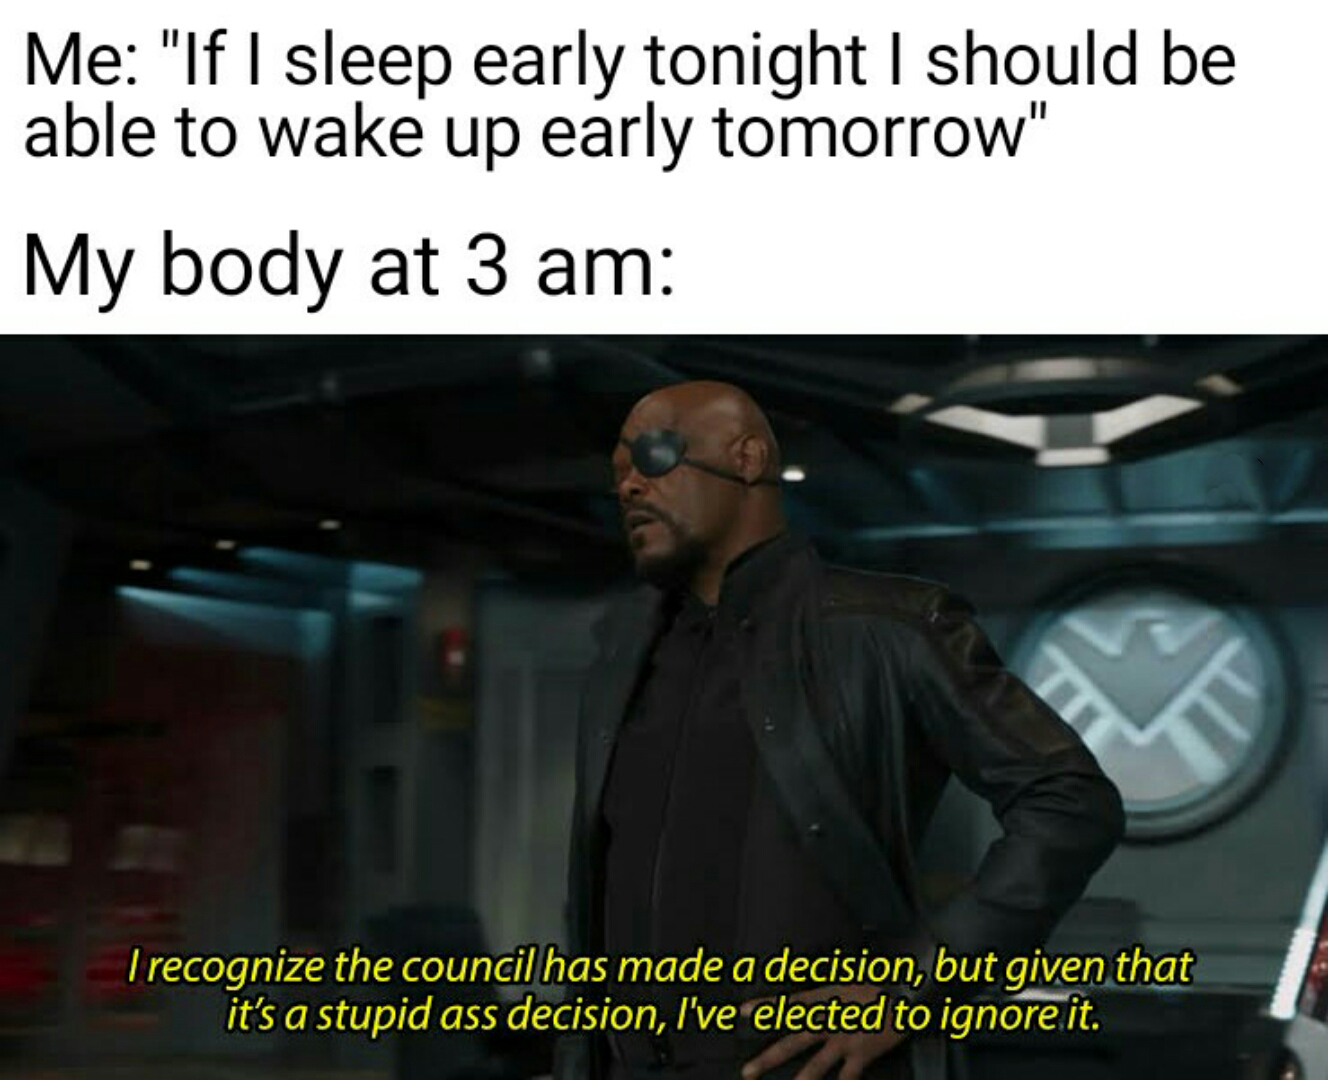 dank memes - recognize the council has made a decision but given that it's a stupid ass decision i ve elected to ignore it - Me "If I sleep early tonight I should be able to wake up early tomorrow" My body at 3 am I recognize the council has made a decisi